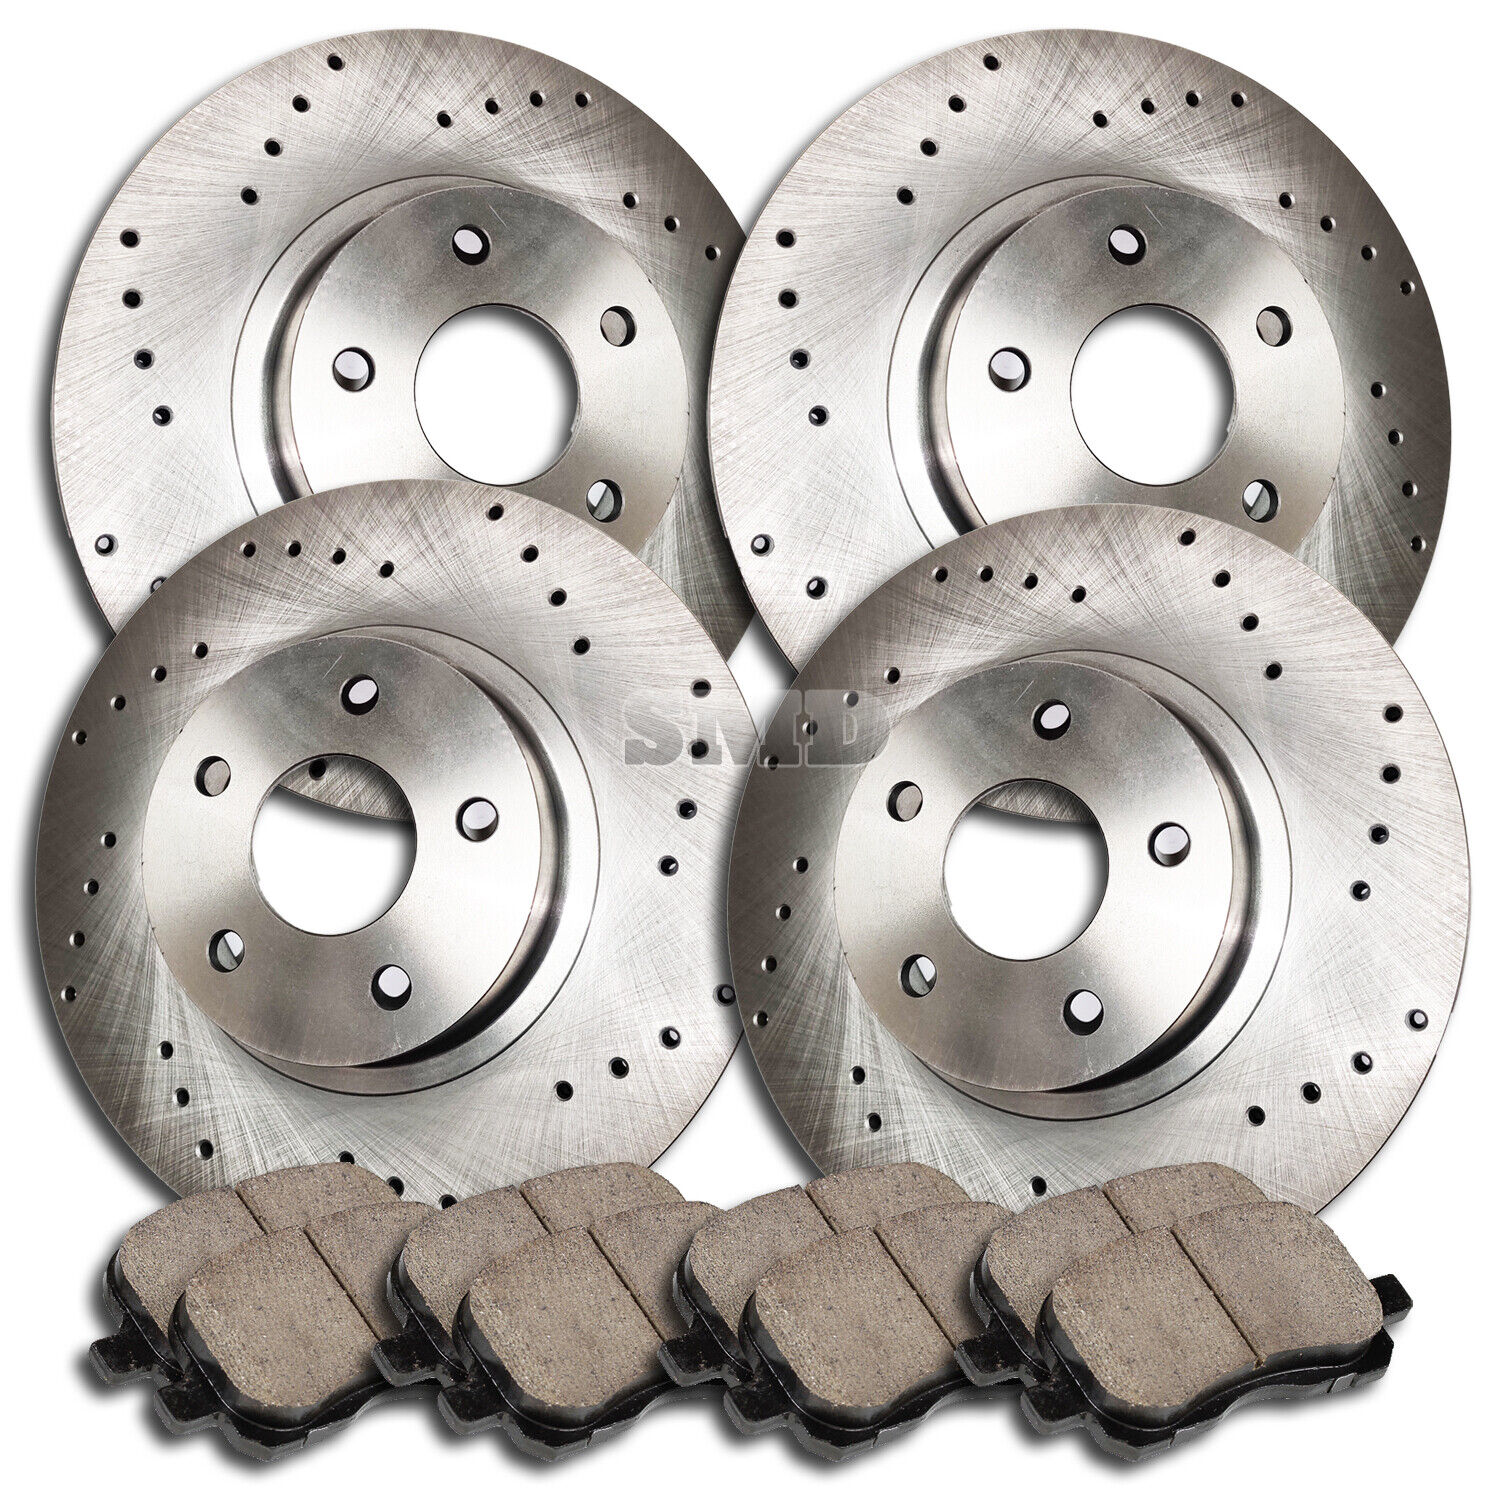 A0091 FIT 1999 2000 Mercury Mountaineer 4WD DRILLED Brake Rotors Ceramic Pads